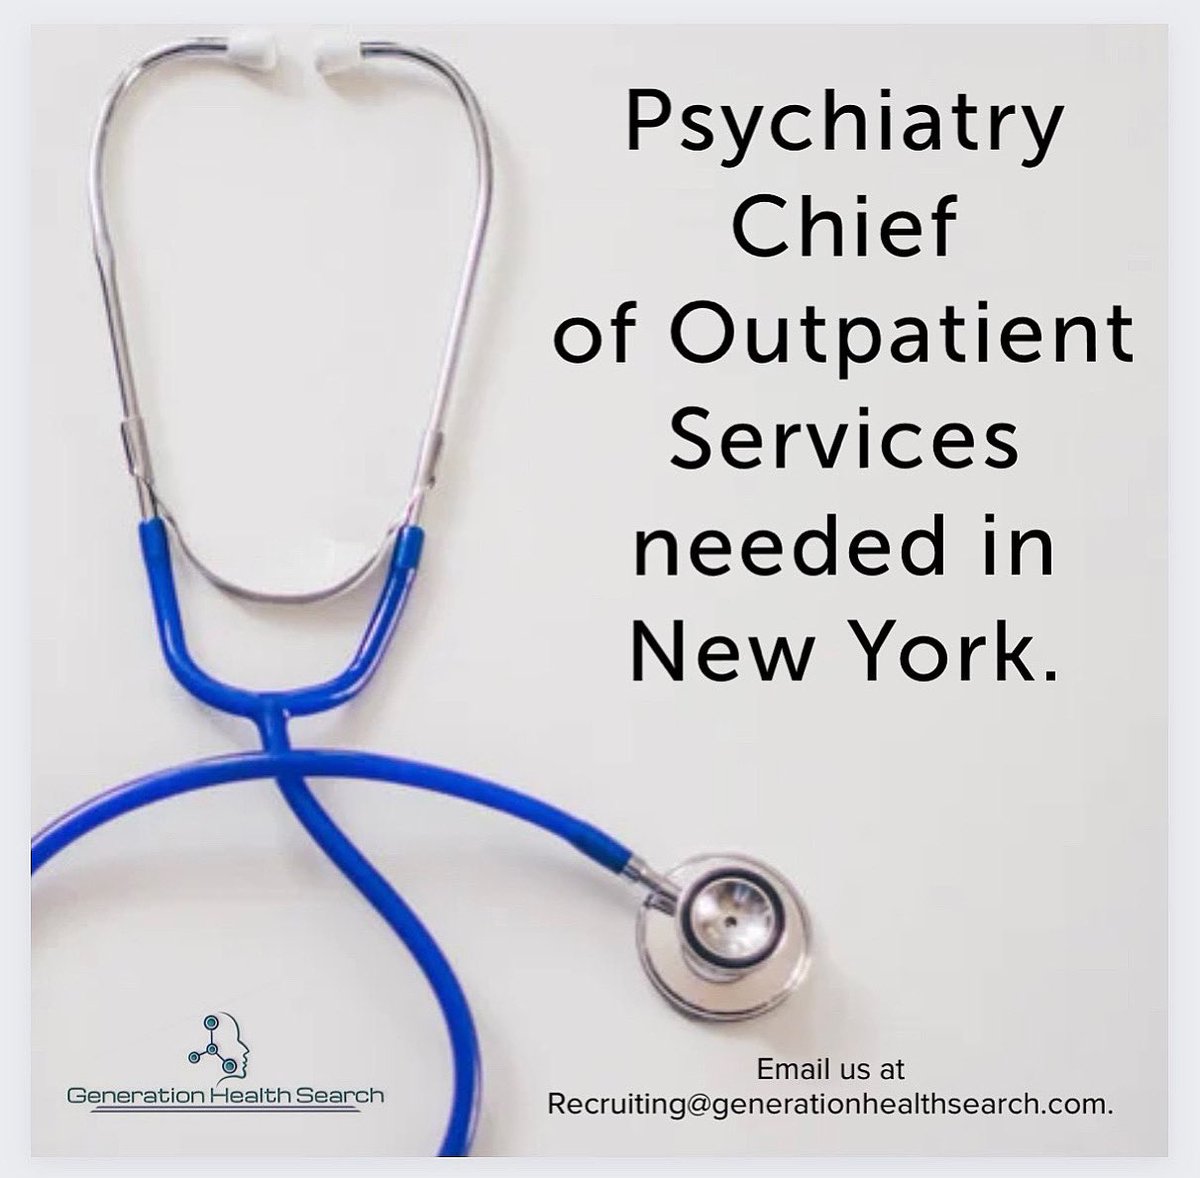 Exciting opportunity in New York for a Psychiatry Chief of Outpatient Services in an administrative role. Email us at Recruiting@generationhealthsearch.com. #PsychiatryChief #HealthcareLeadership #AdministrativeRole #NewYork #GenerationHealthSearch 🩺